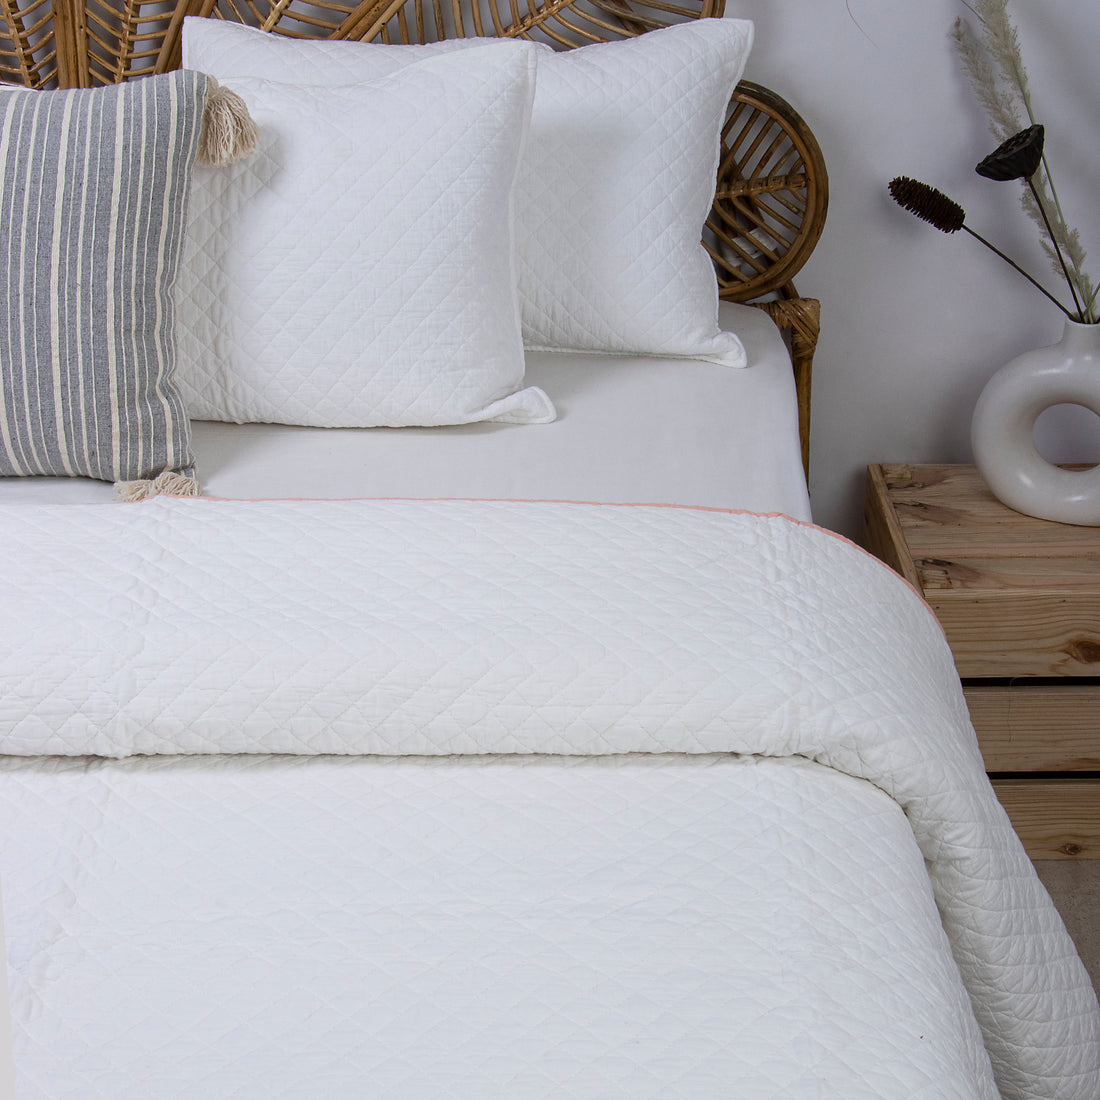 Cotton White Stipes Jaipuri Quilted Bedspreads